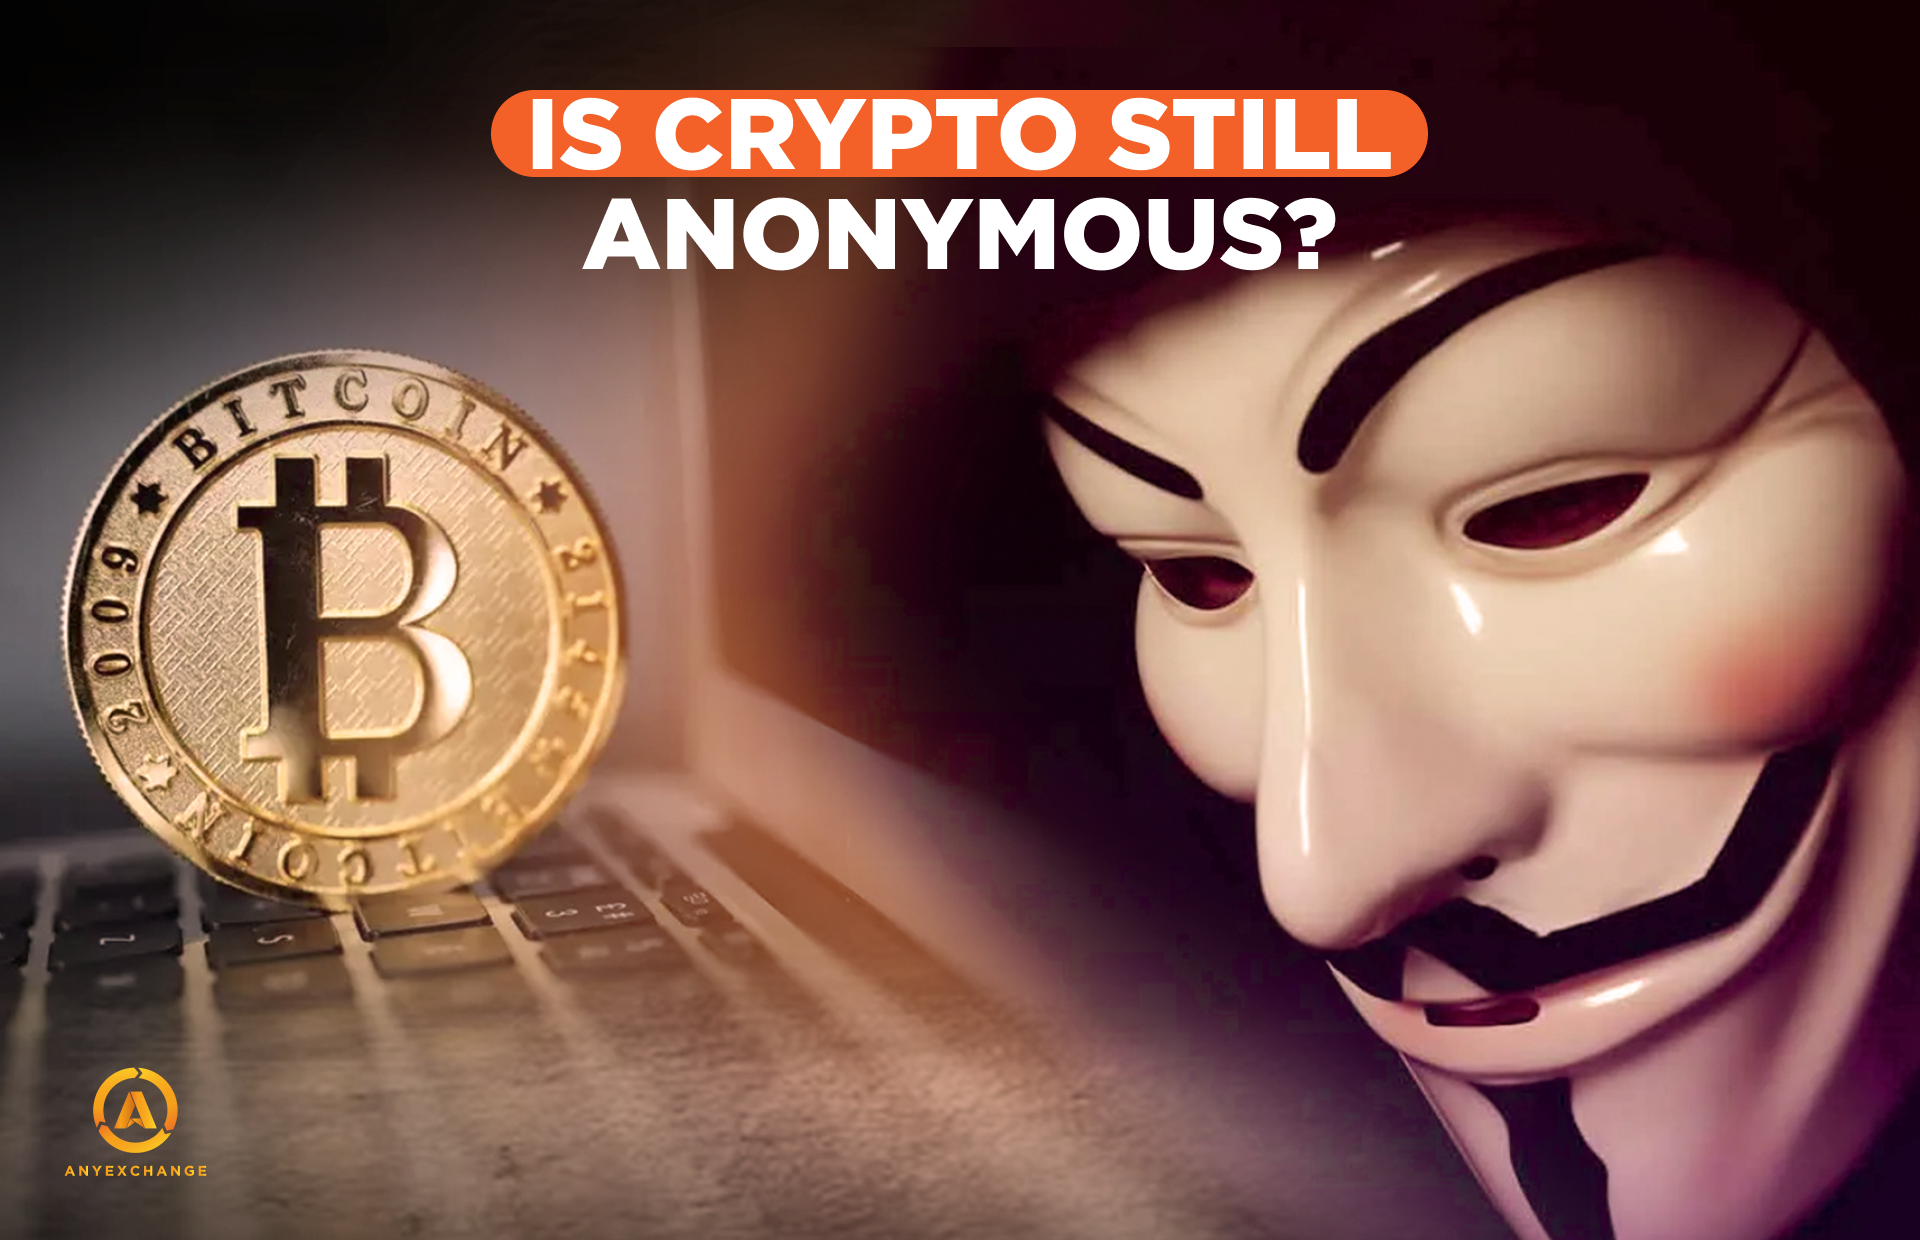 Anonymity in crypto